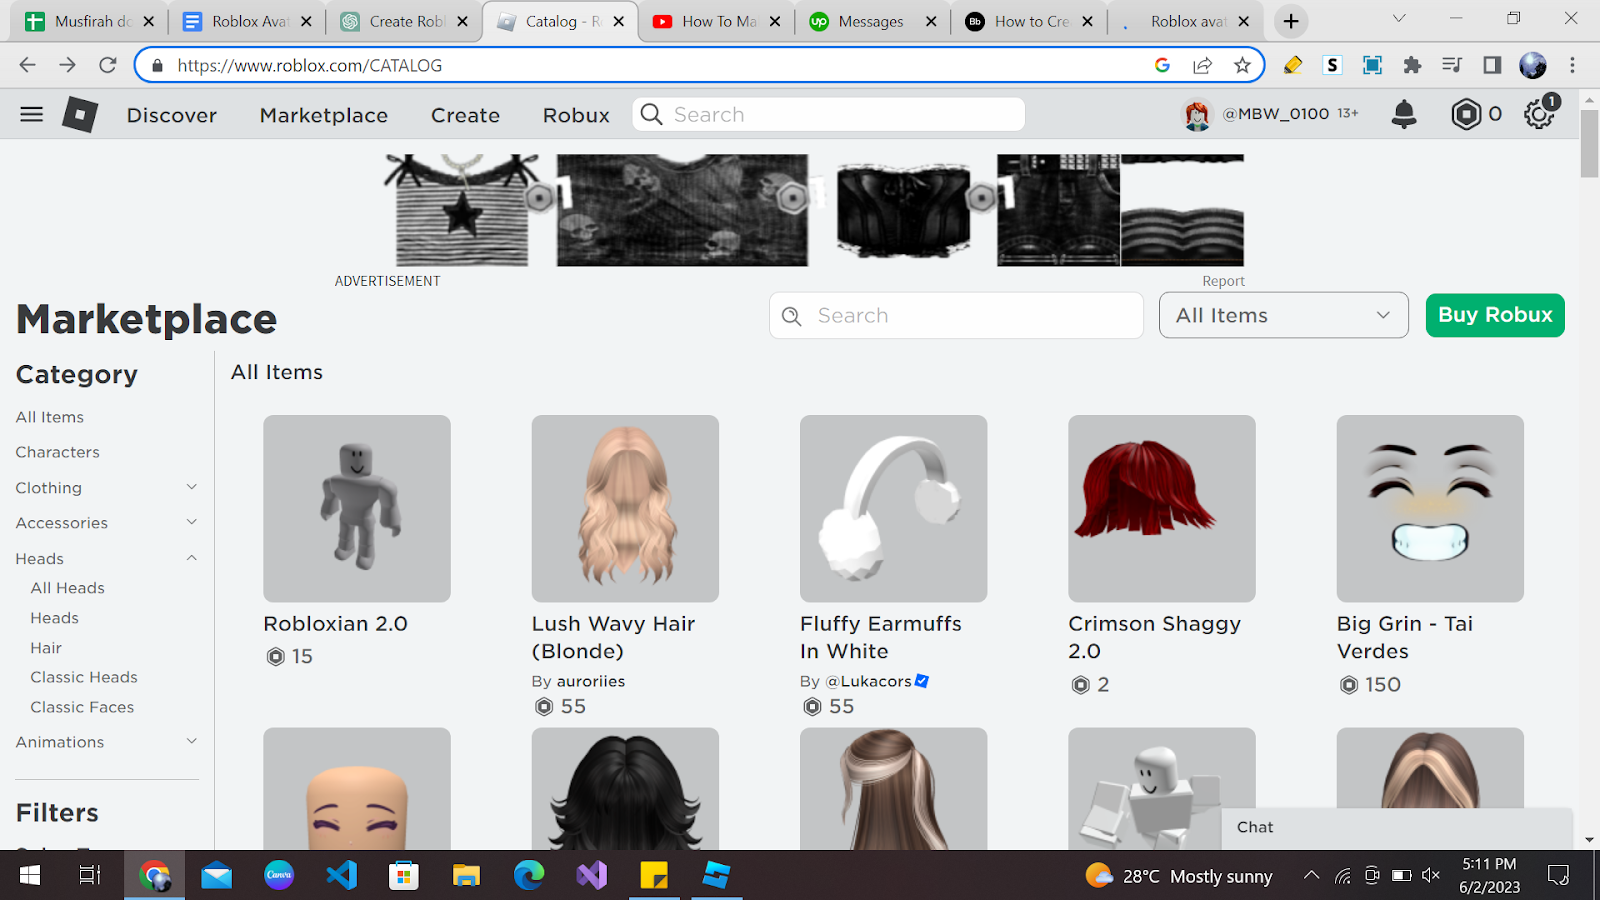 Roblox avatar settings may not apply when a player is uploaded to